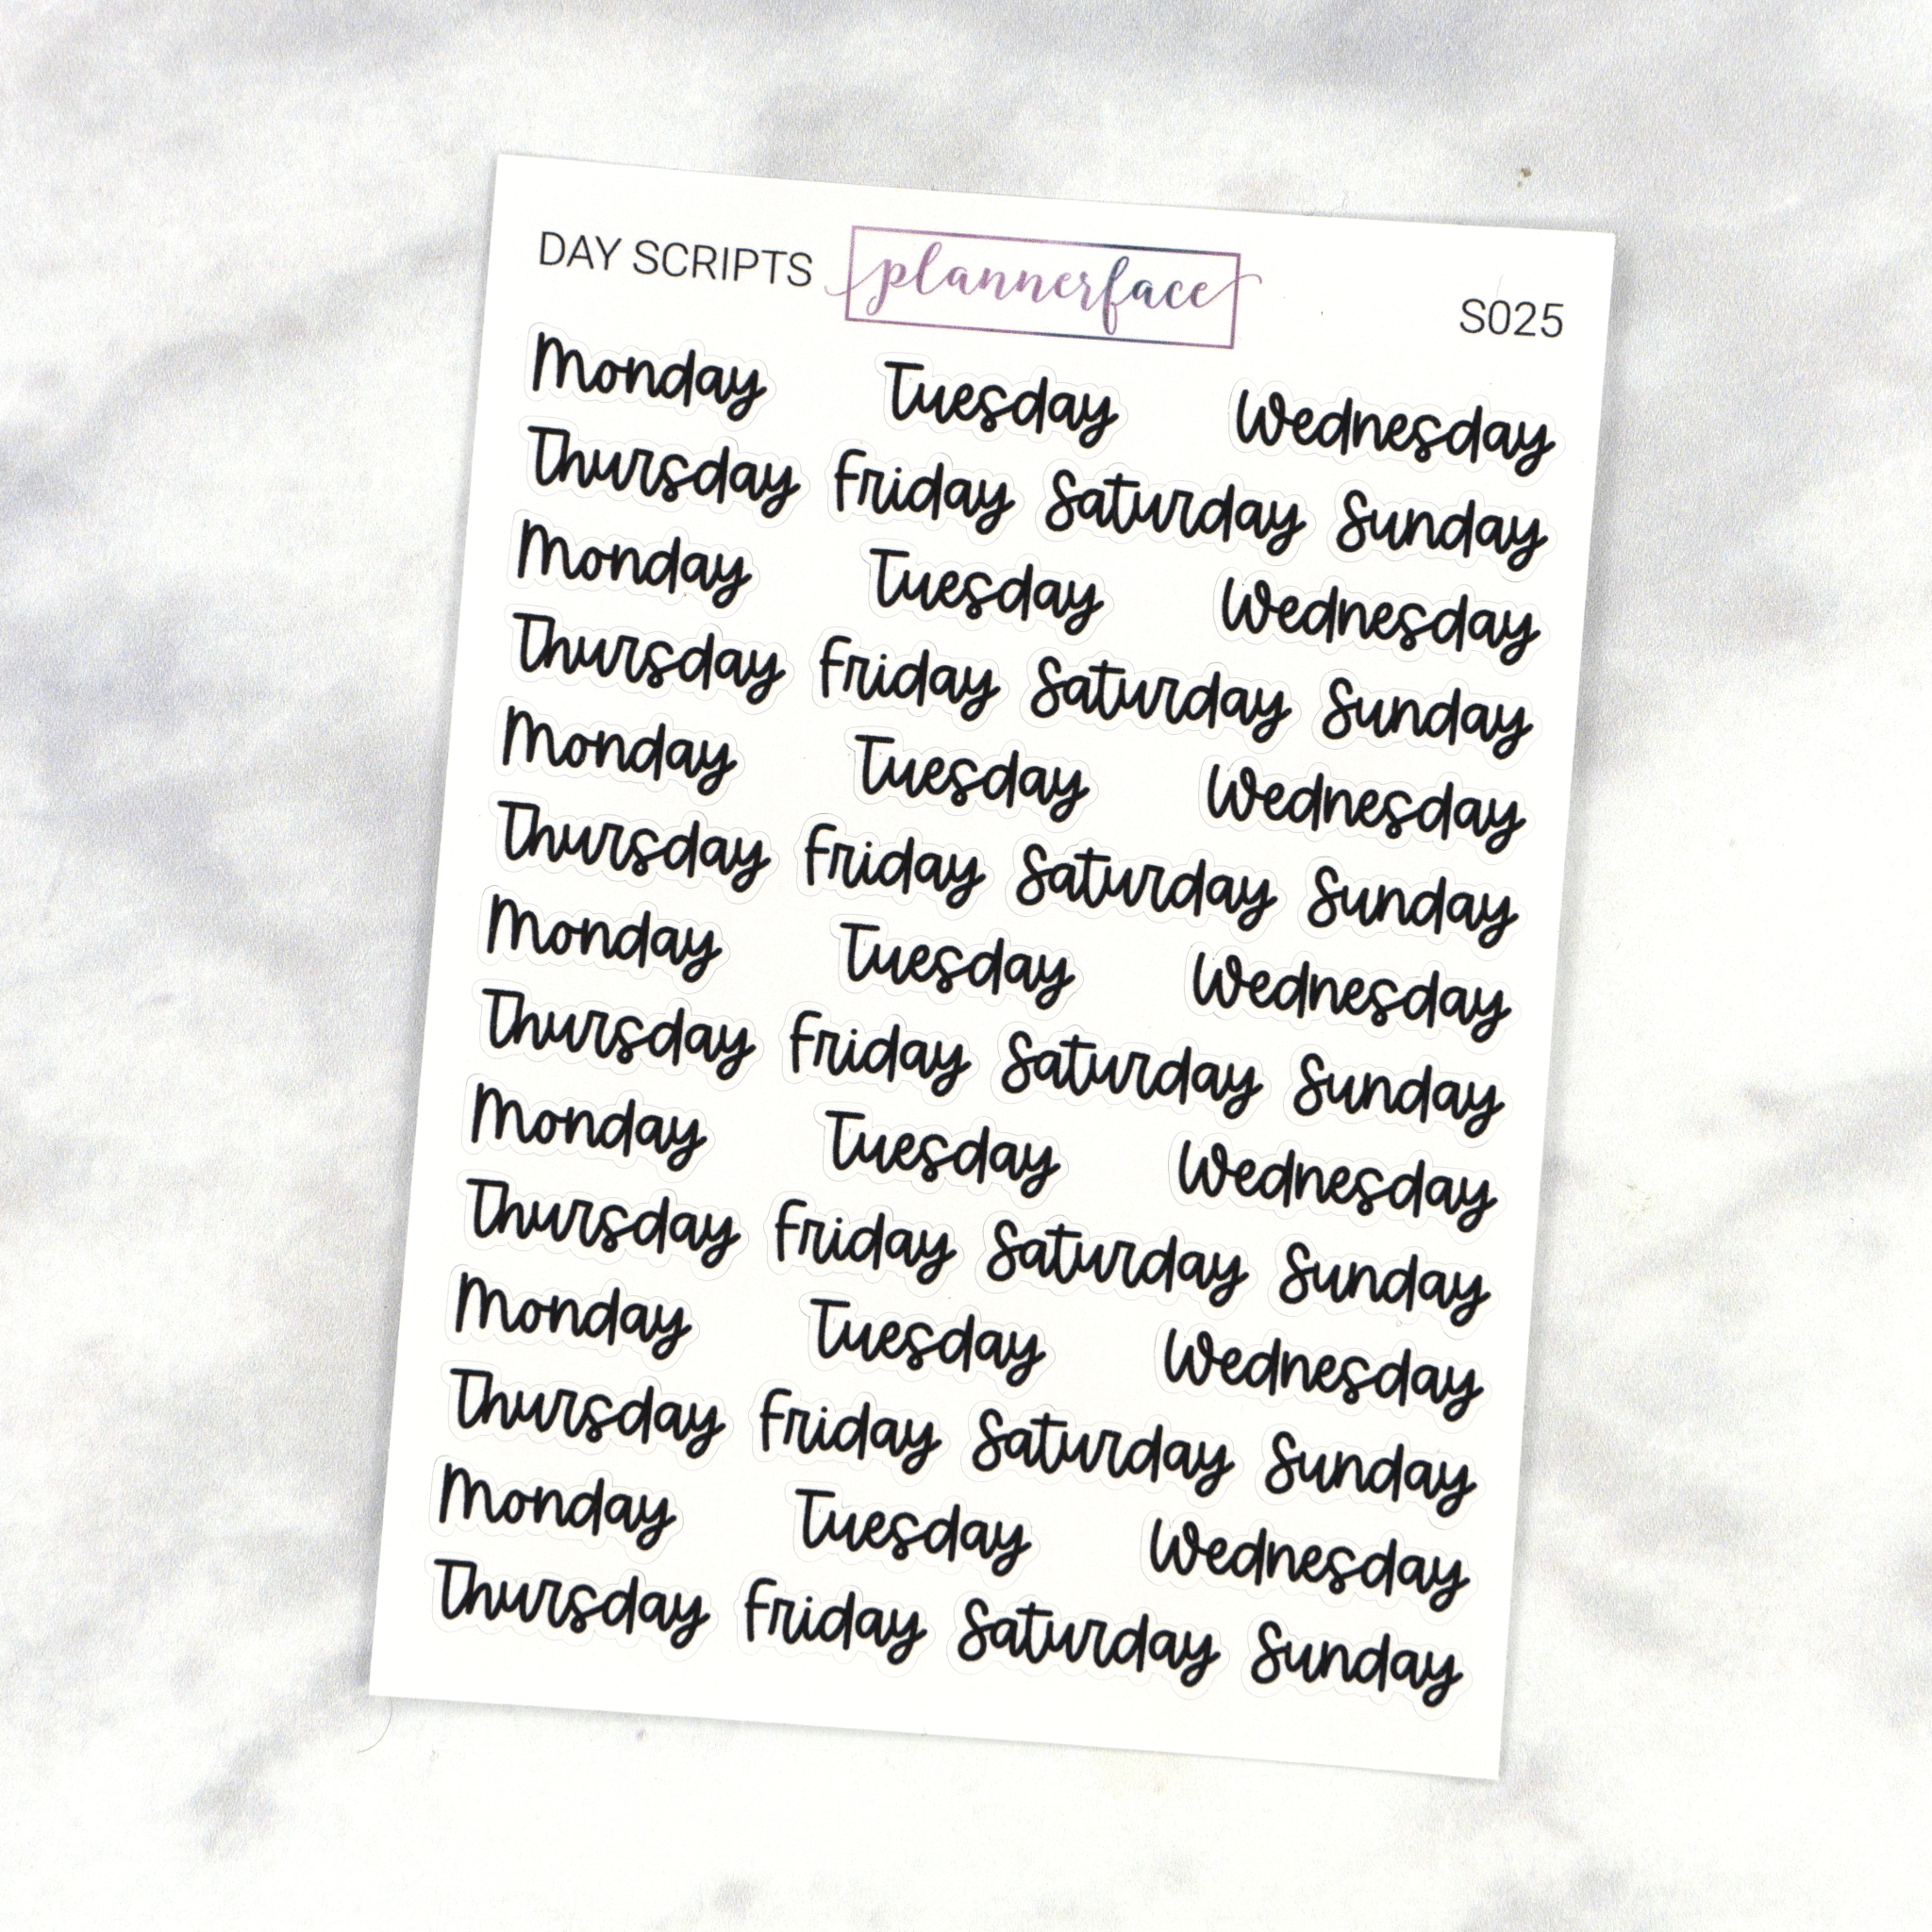 Days of the Week | Scripts by Plannerface